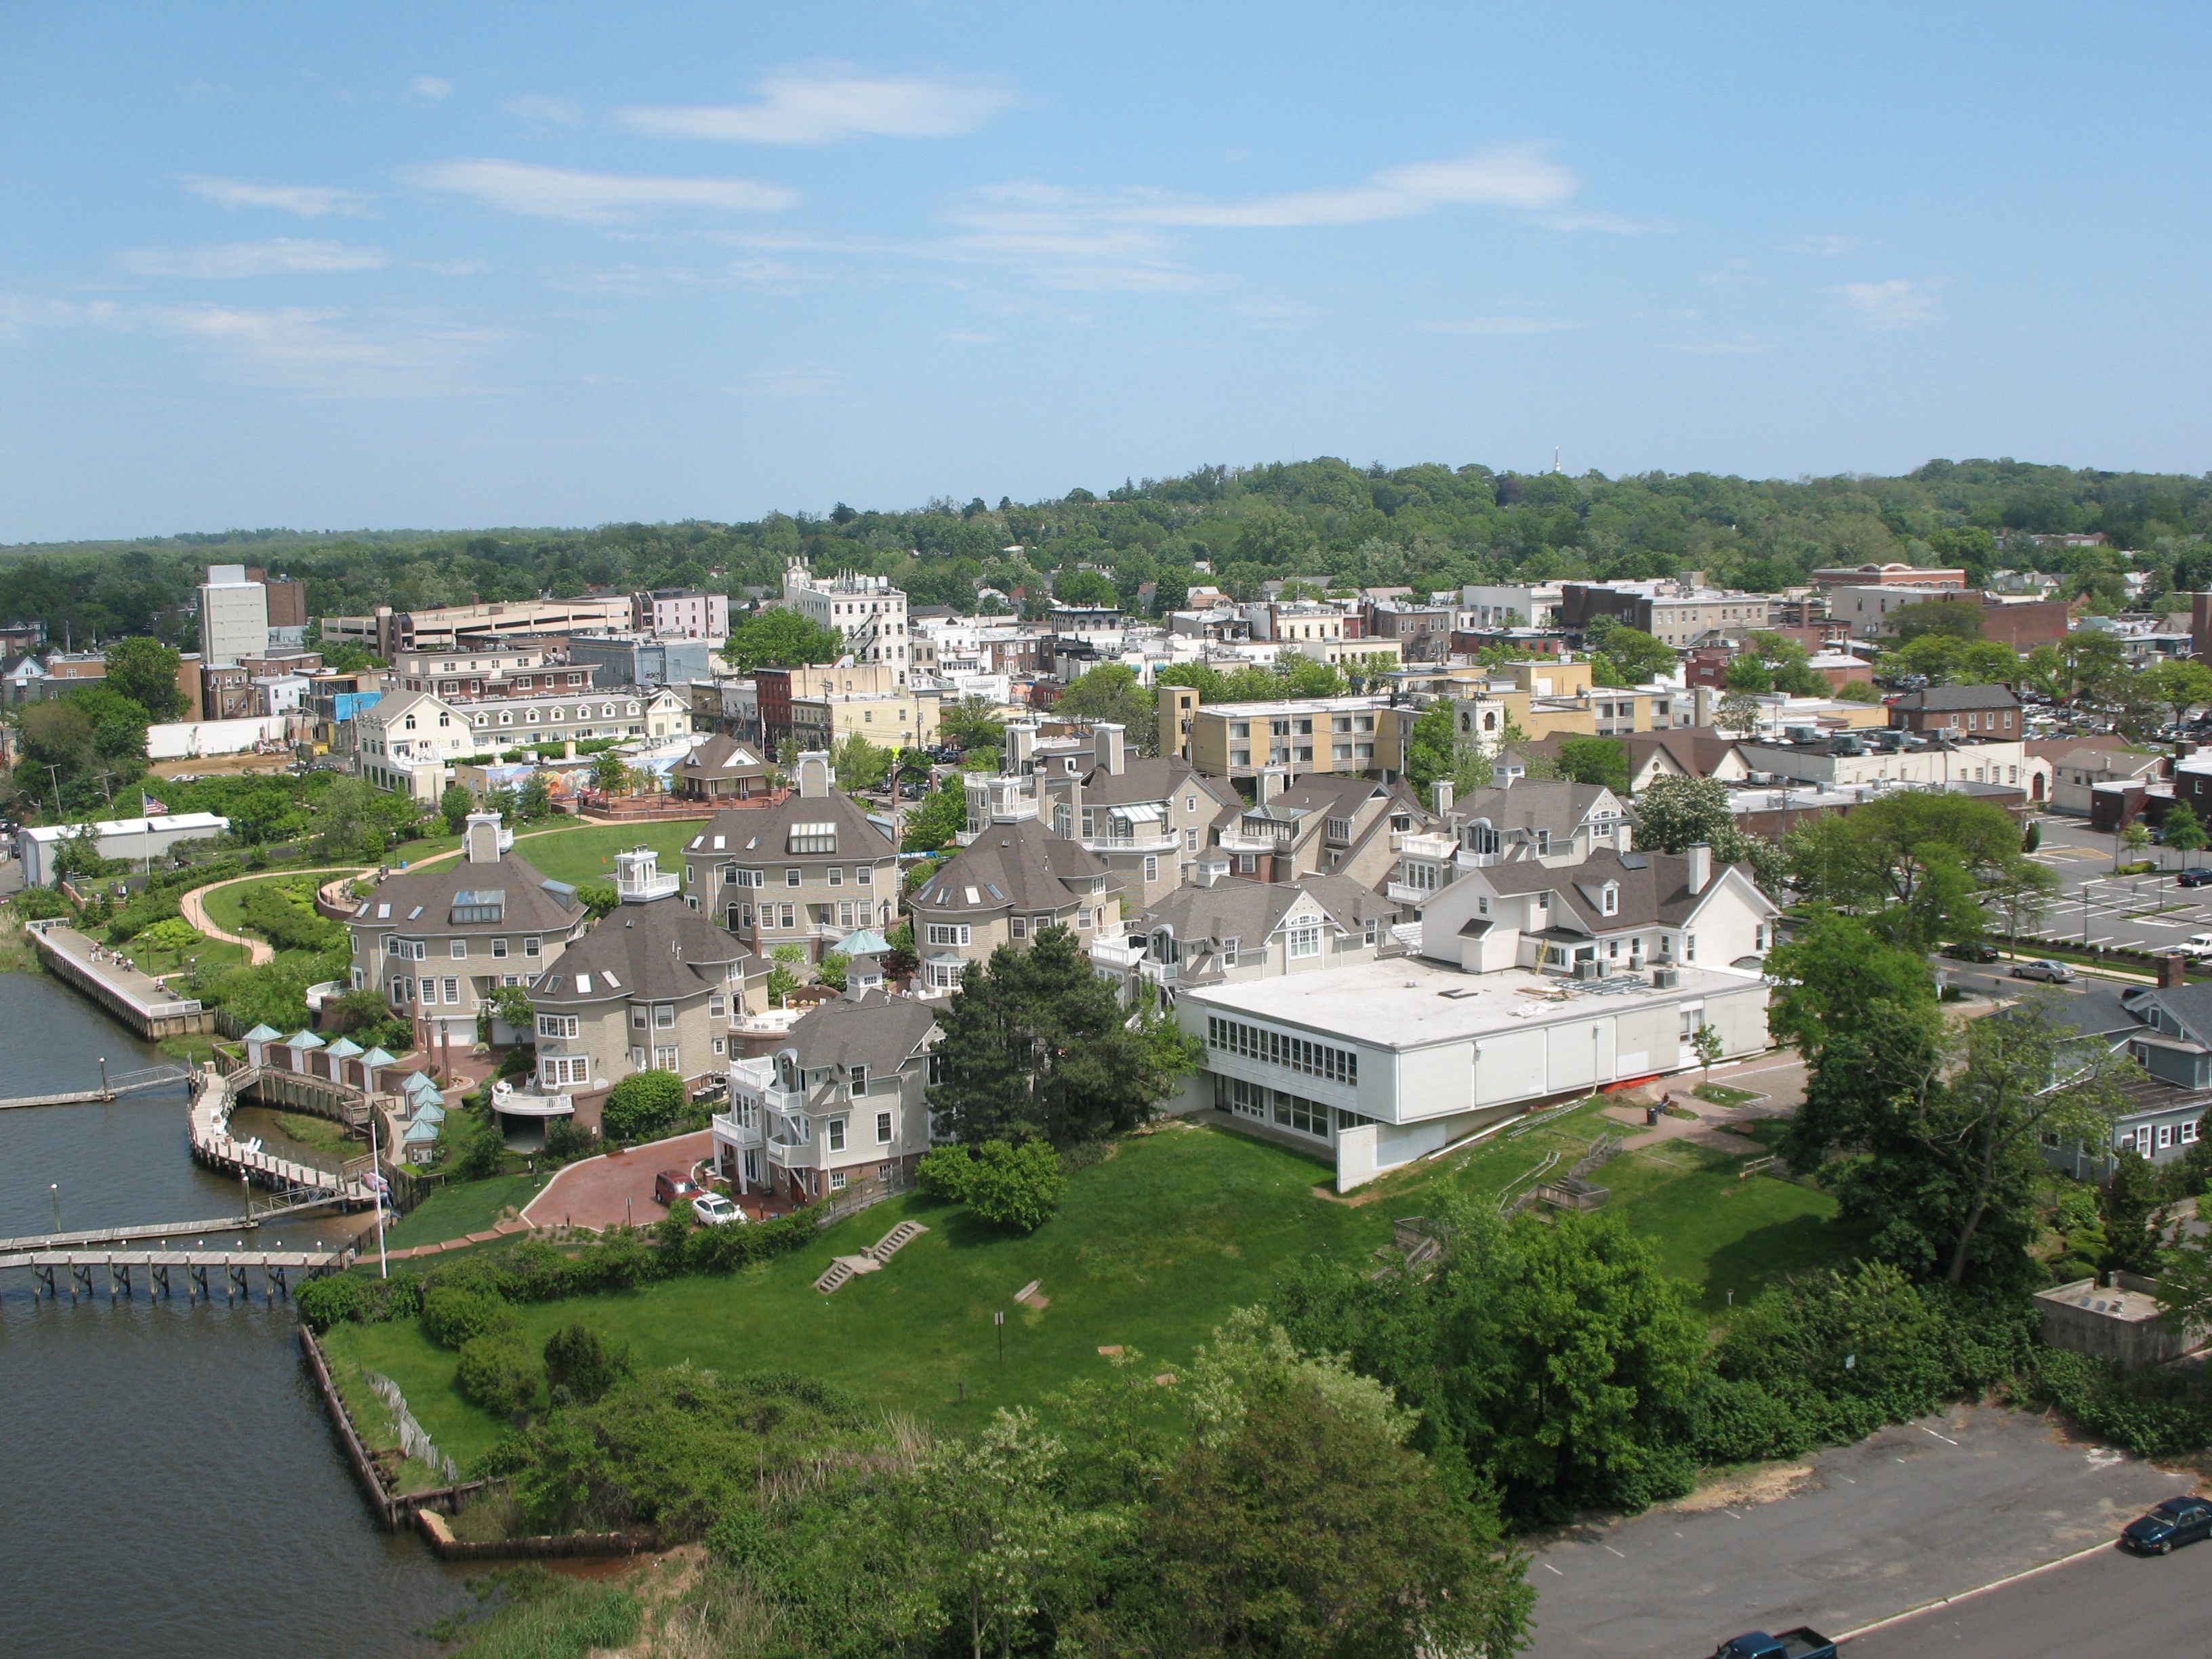 An aerial view of the small town of Red Bank, New Jersey, USA